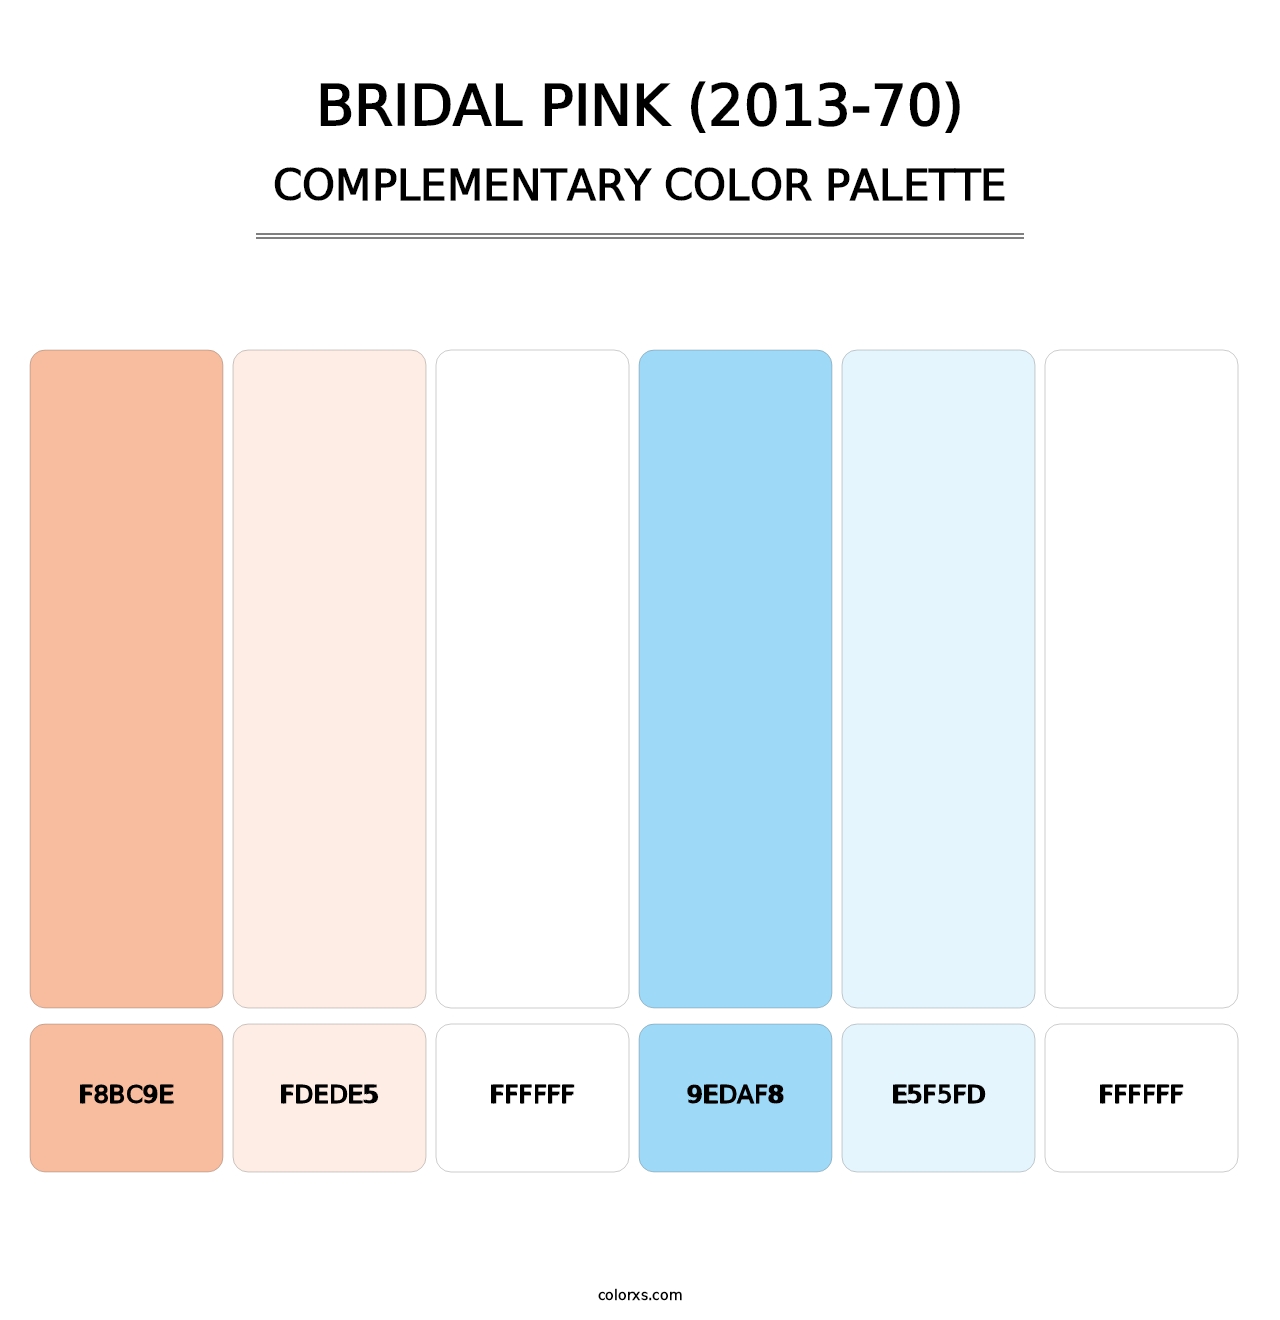 Bridal Pink (2013-70) - Complementary Color Palette